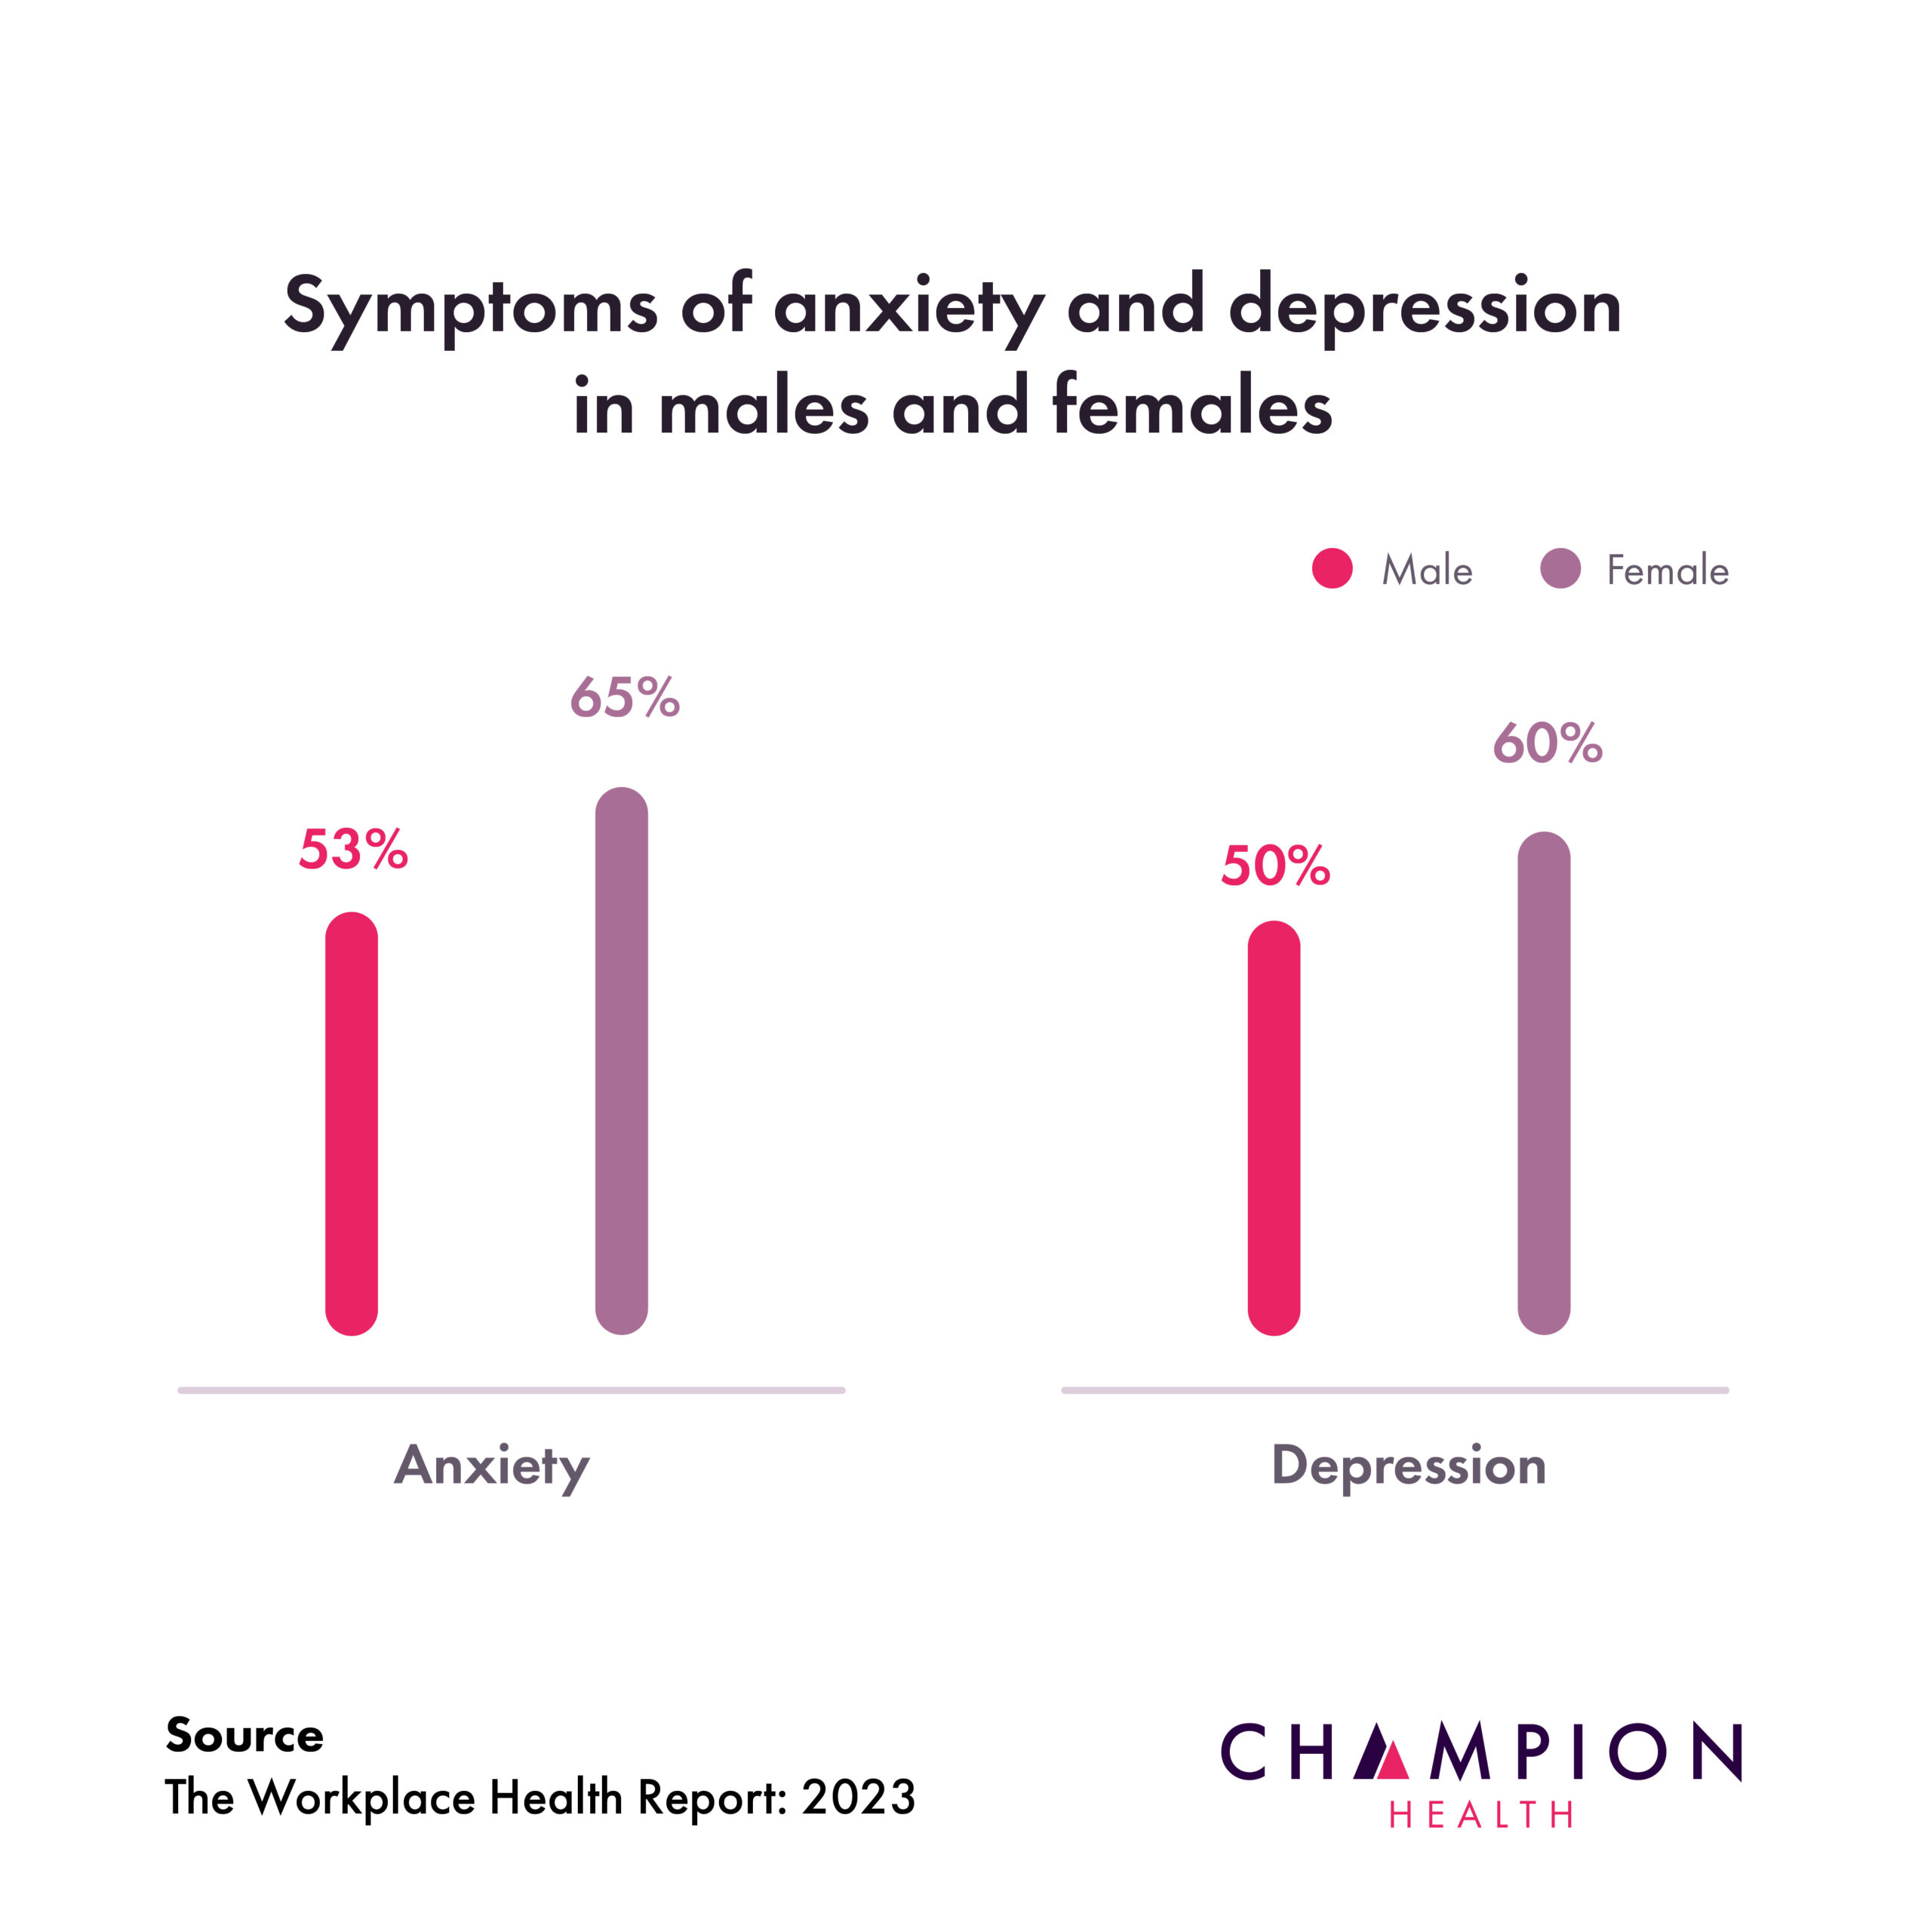 Symptoms of anxiety and depresison in males and females